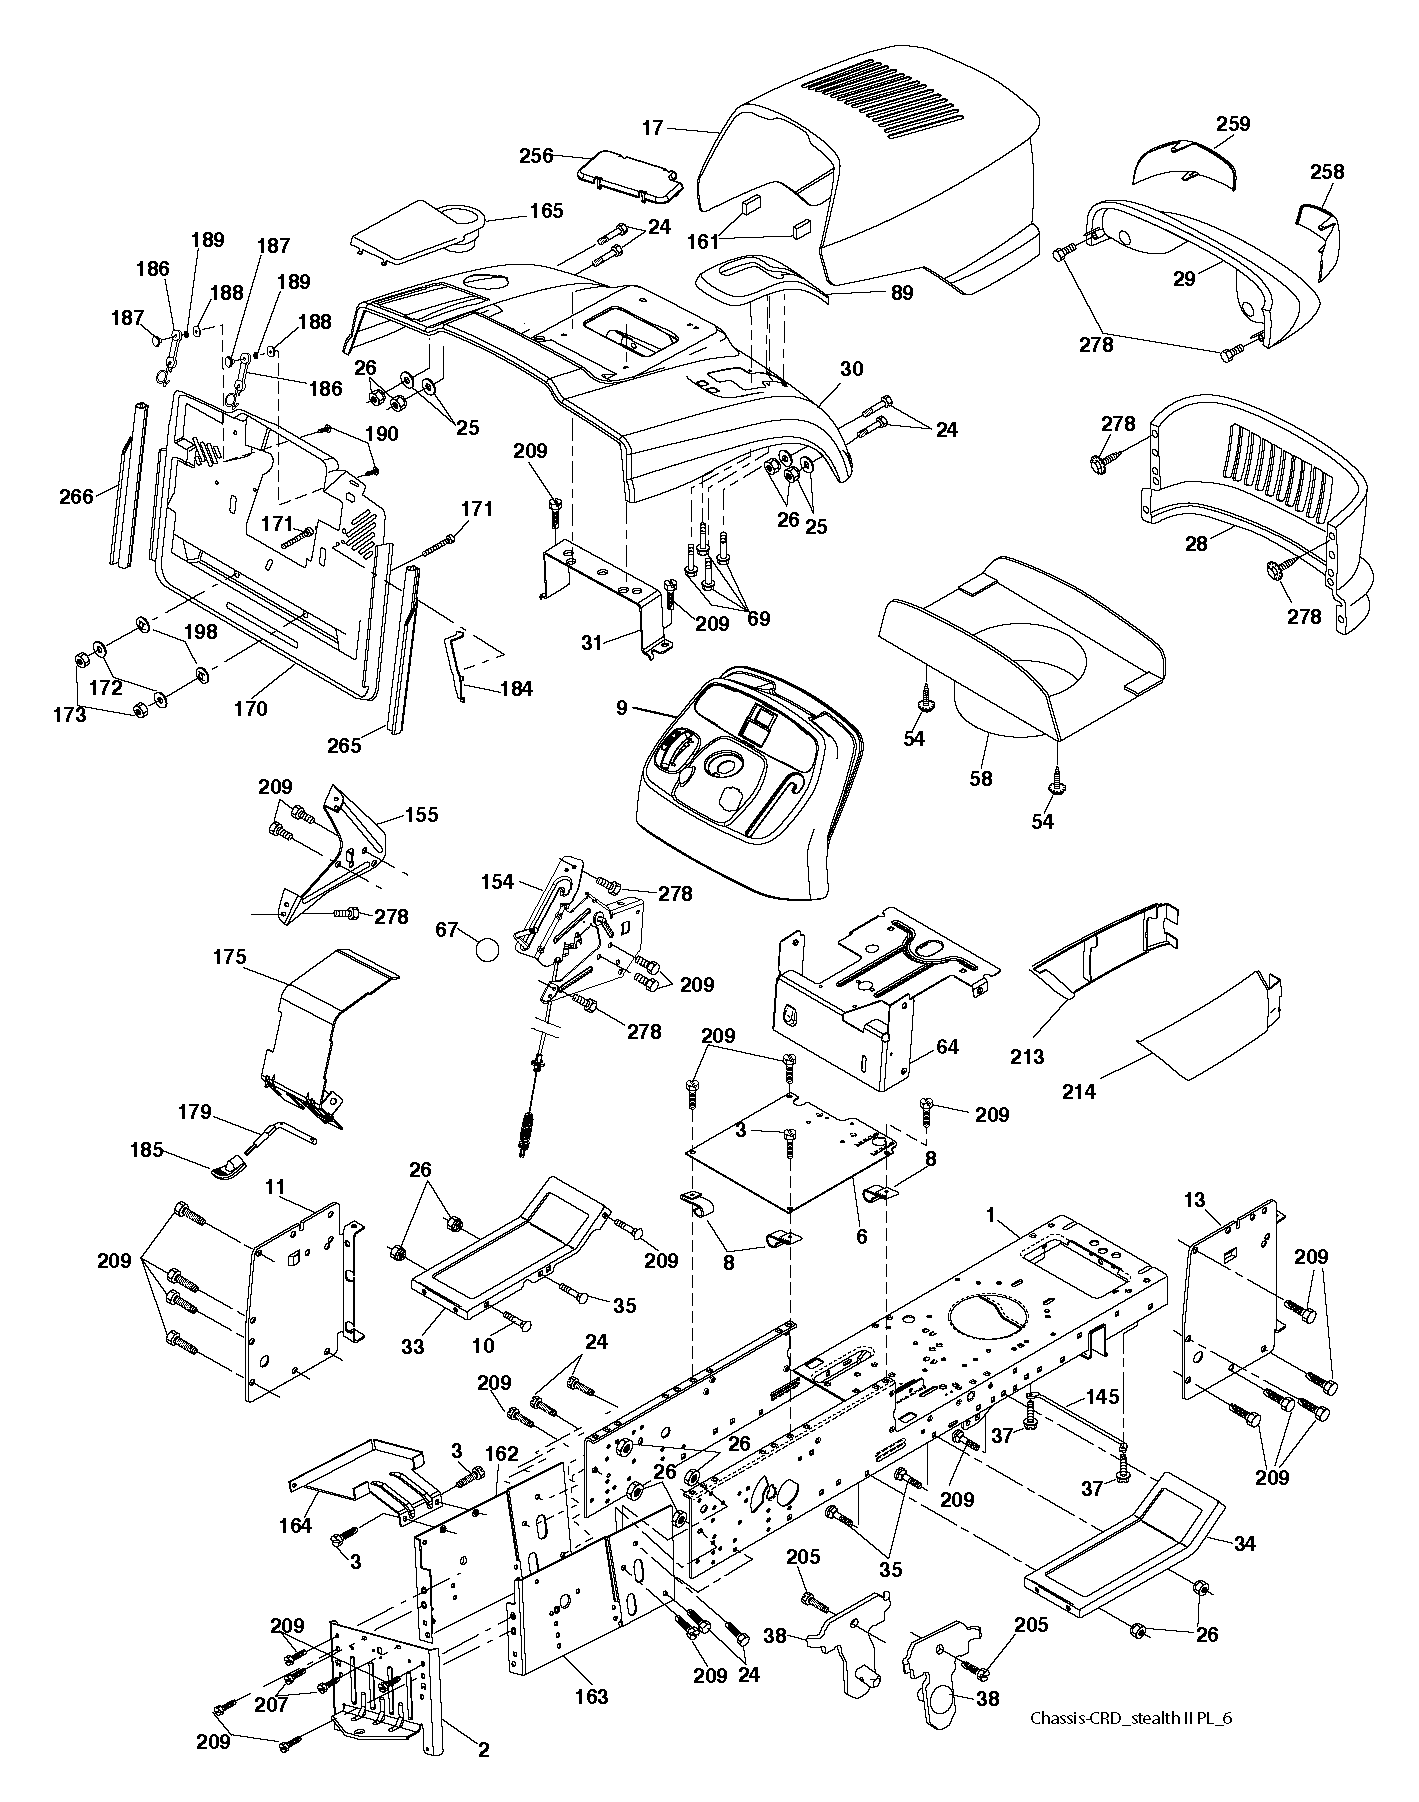 Chassis and appendix 532174620, 583101001, 817060612, 583133601, 532126471, 584463701, 872140608, 532167203, 532167202, 532195647, 596564401, 734117201, 596322601, 532187114, 532179763, 532197364, 532165156, 532182507, 532182508, 596136001, 596030701, 583117401, 532192512, 532175351, 532184340, 532106932, 532142432, 532197366, 532409167, 532194828, 583130001, 532164655, 532180382, 583100901, 532165605, 532181356, 586730701, 596337801, 734117441, 873510600, 583707801, 583100601, 532174662, 532441416, 597000601, 596987401, 819061216, 810071000, 596039001, 532168937, 596564001, 817670508, 817000612, 532187112, 532187111, 532181360, 532161842, 532182885, 583146701, 583146601, 596321701